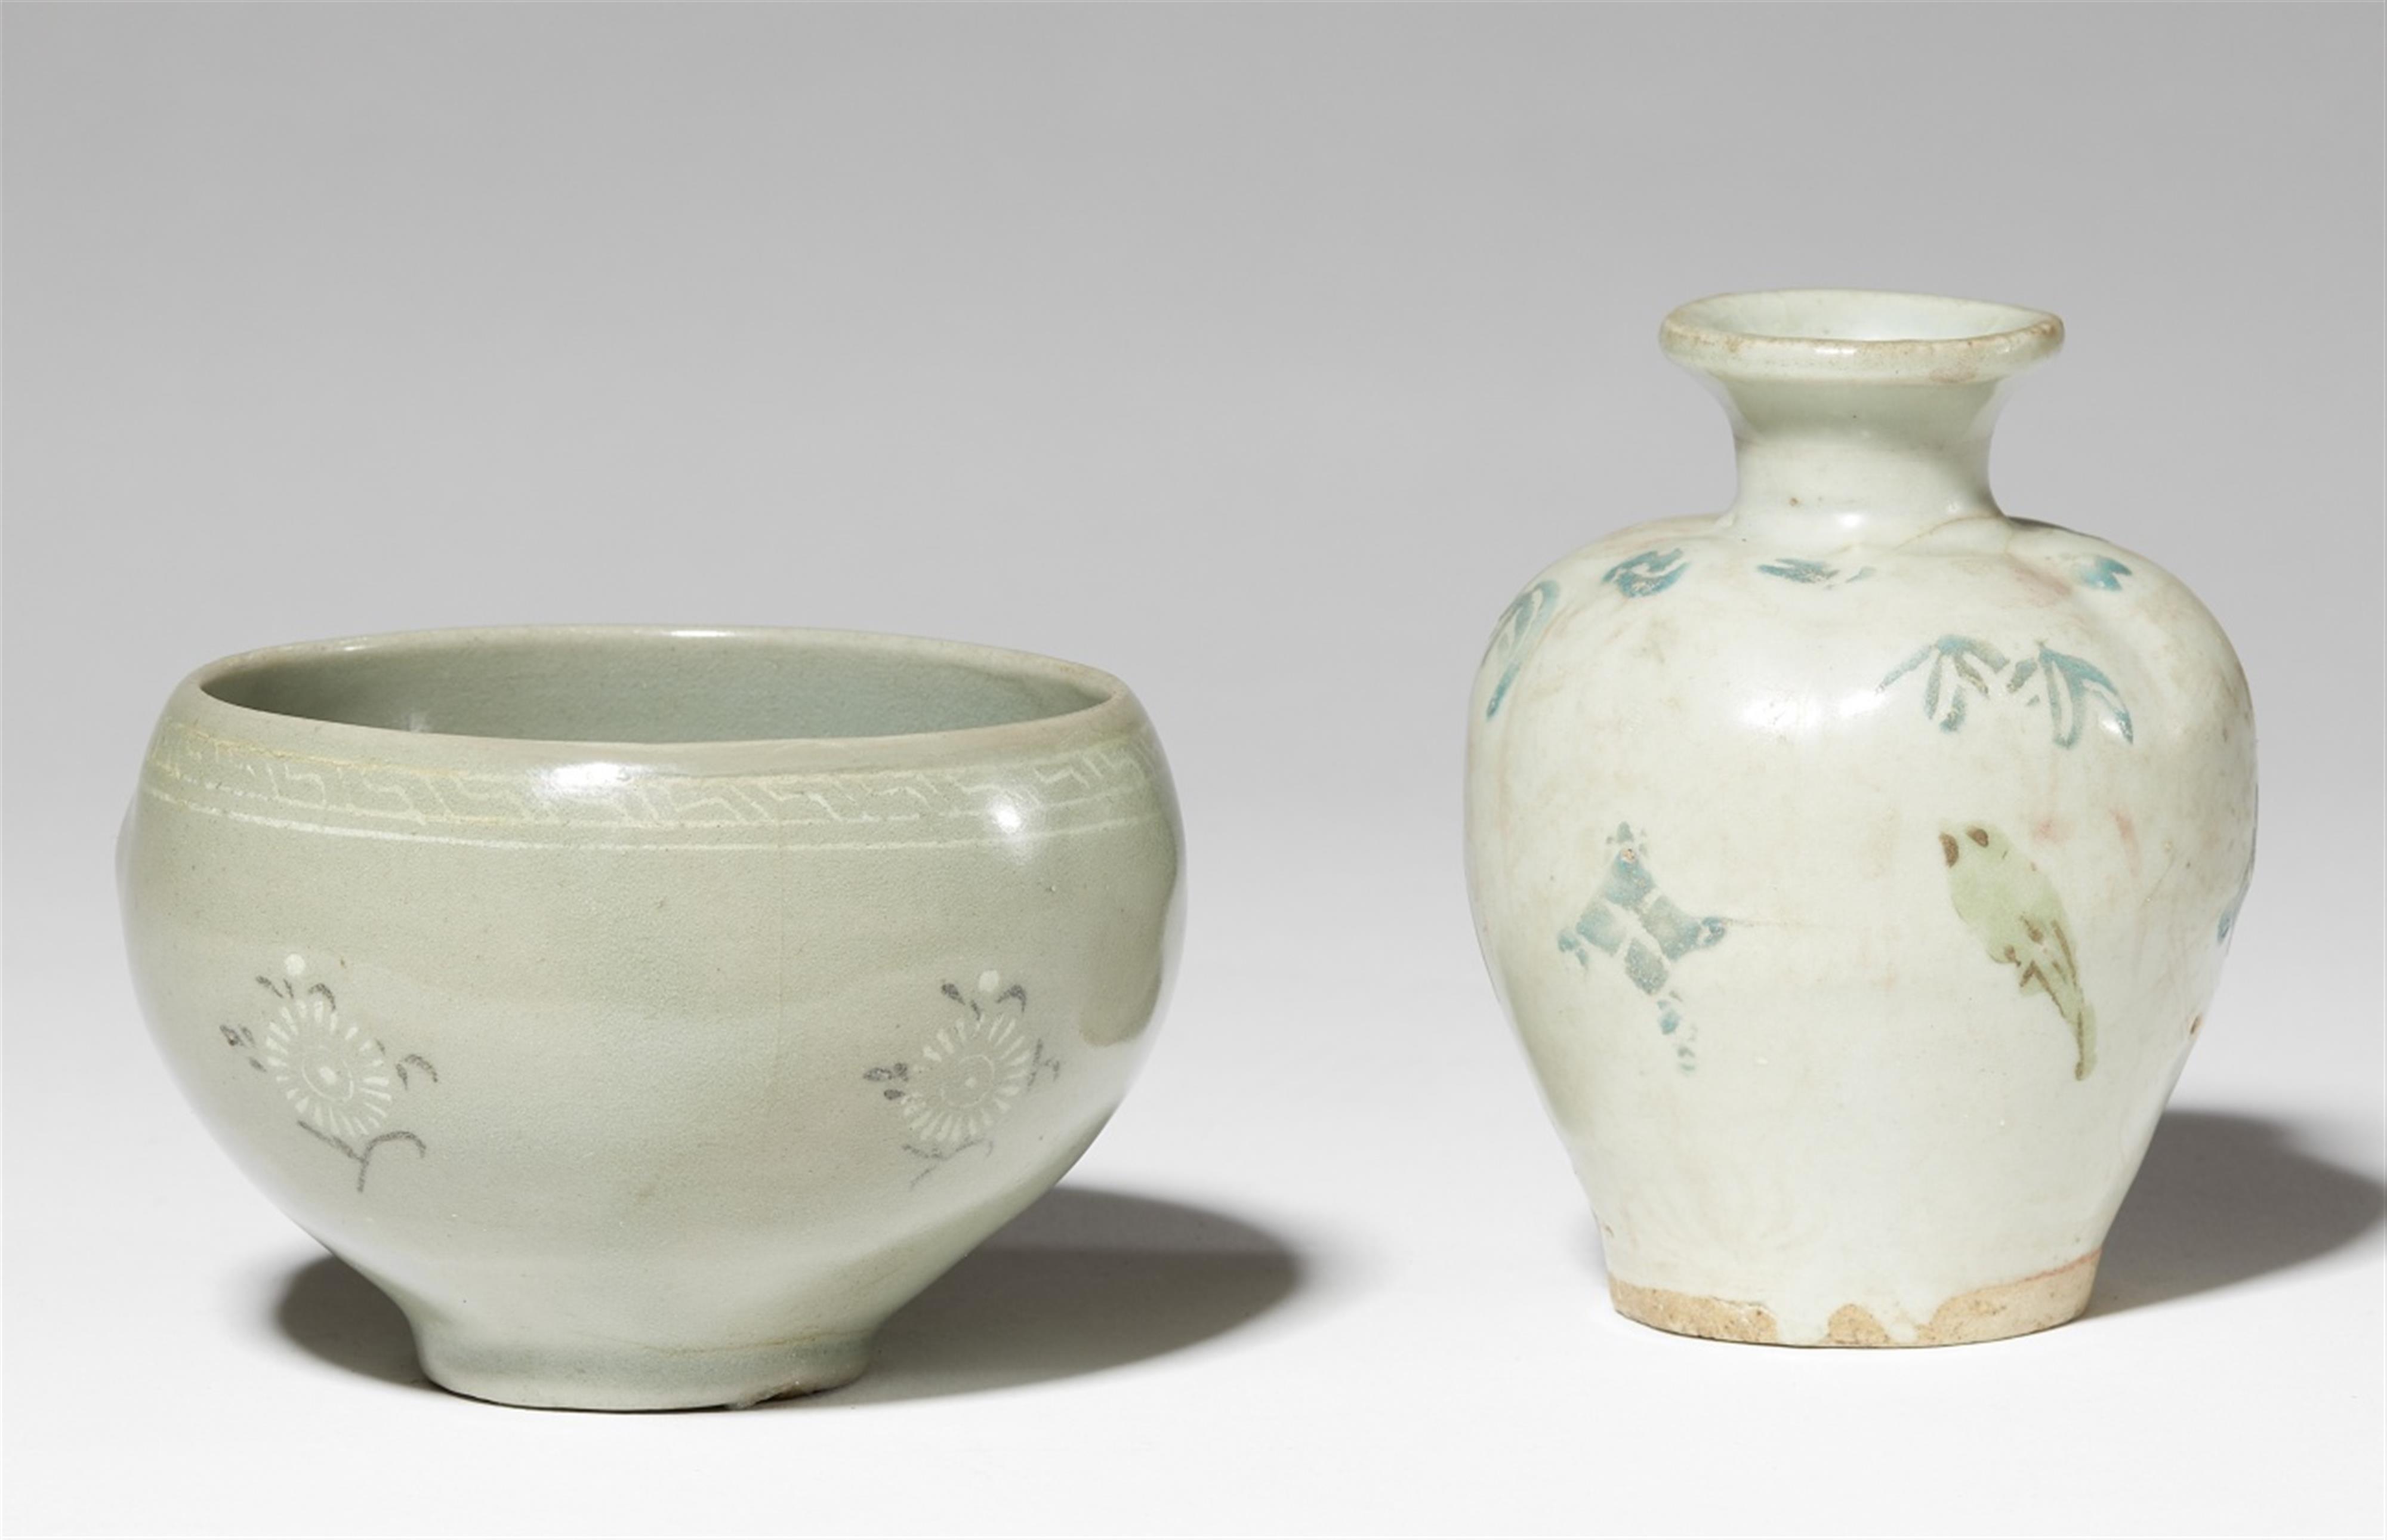 A Korean inlaid slip-decorated celadon cup and a small Annamese vase. 15th century - image-1